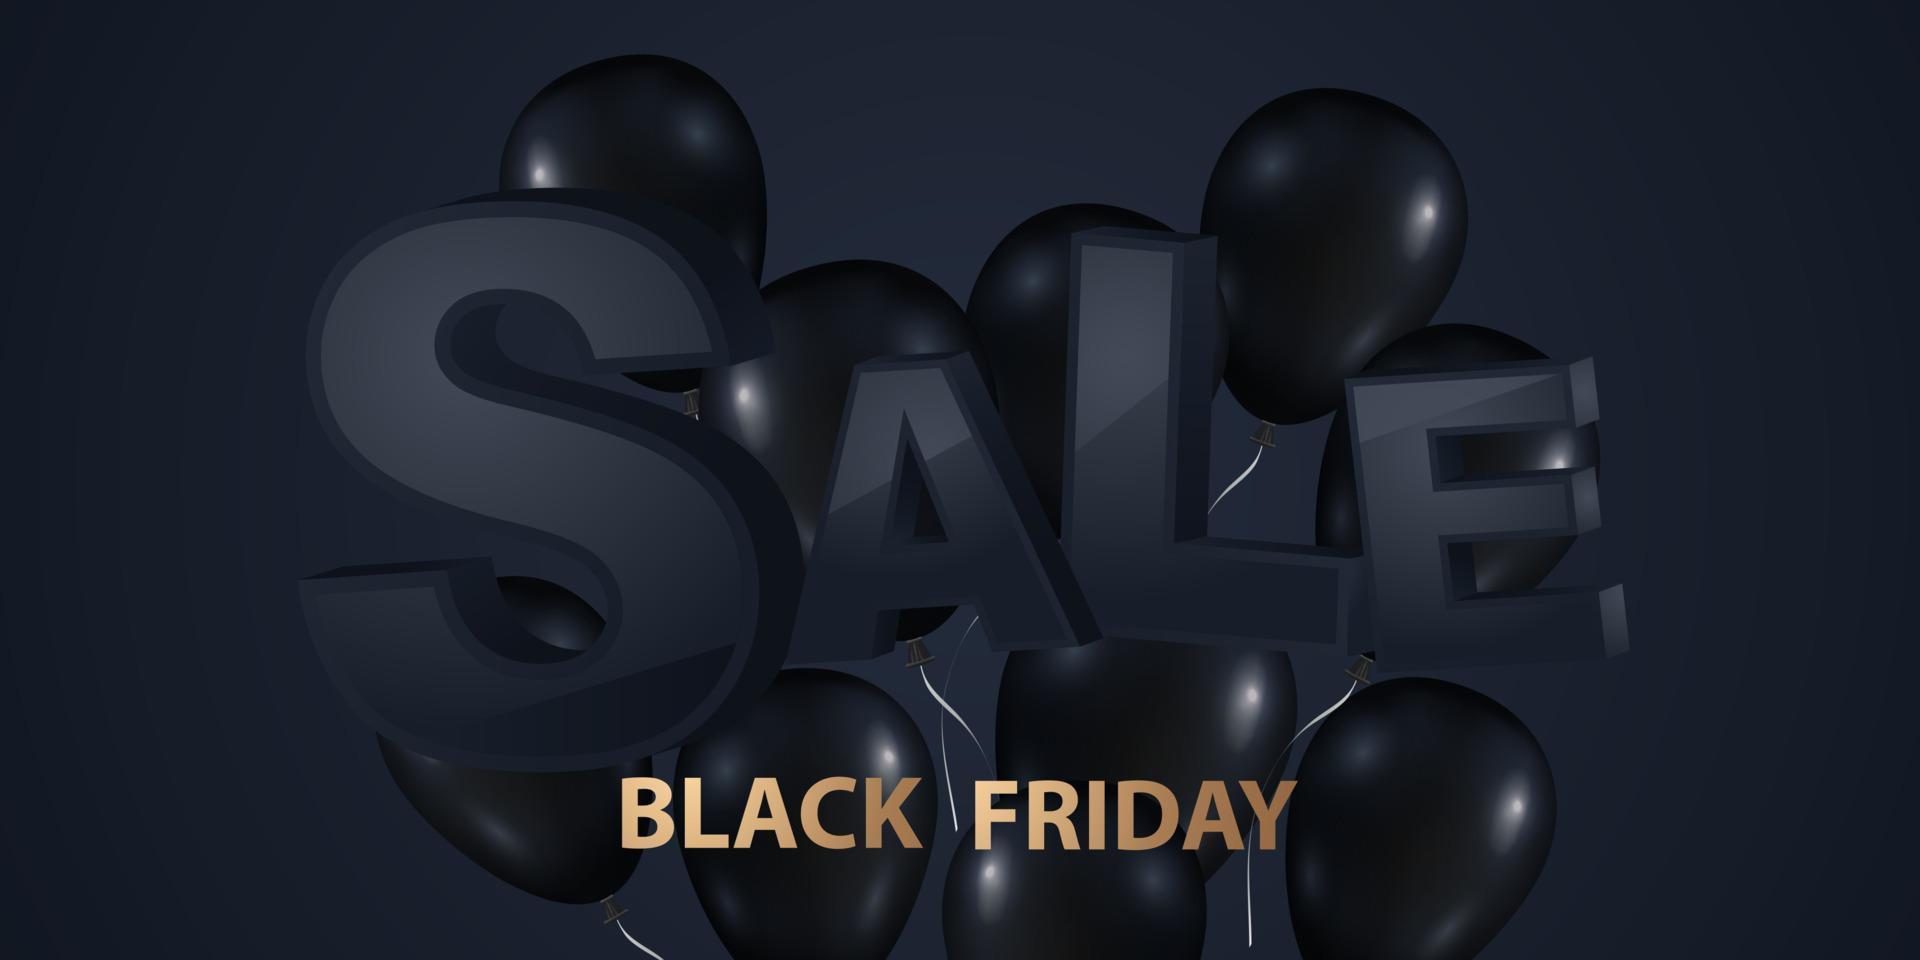 Black friday sale background with beautiful balloons and SALE inscription. Modern design. Universal vector background for posters, banners, flyers. Vector illustration